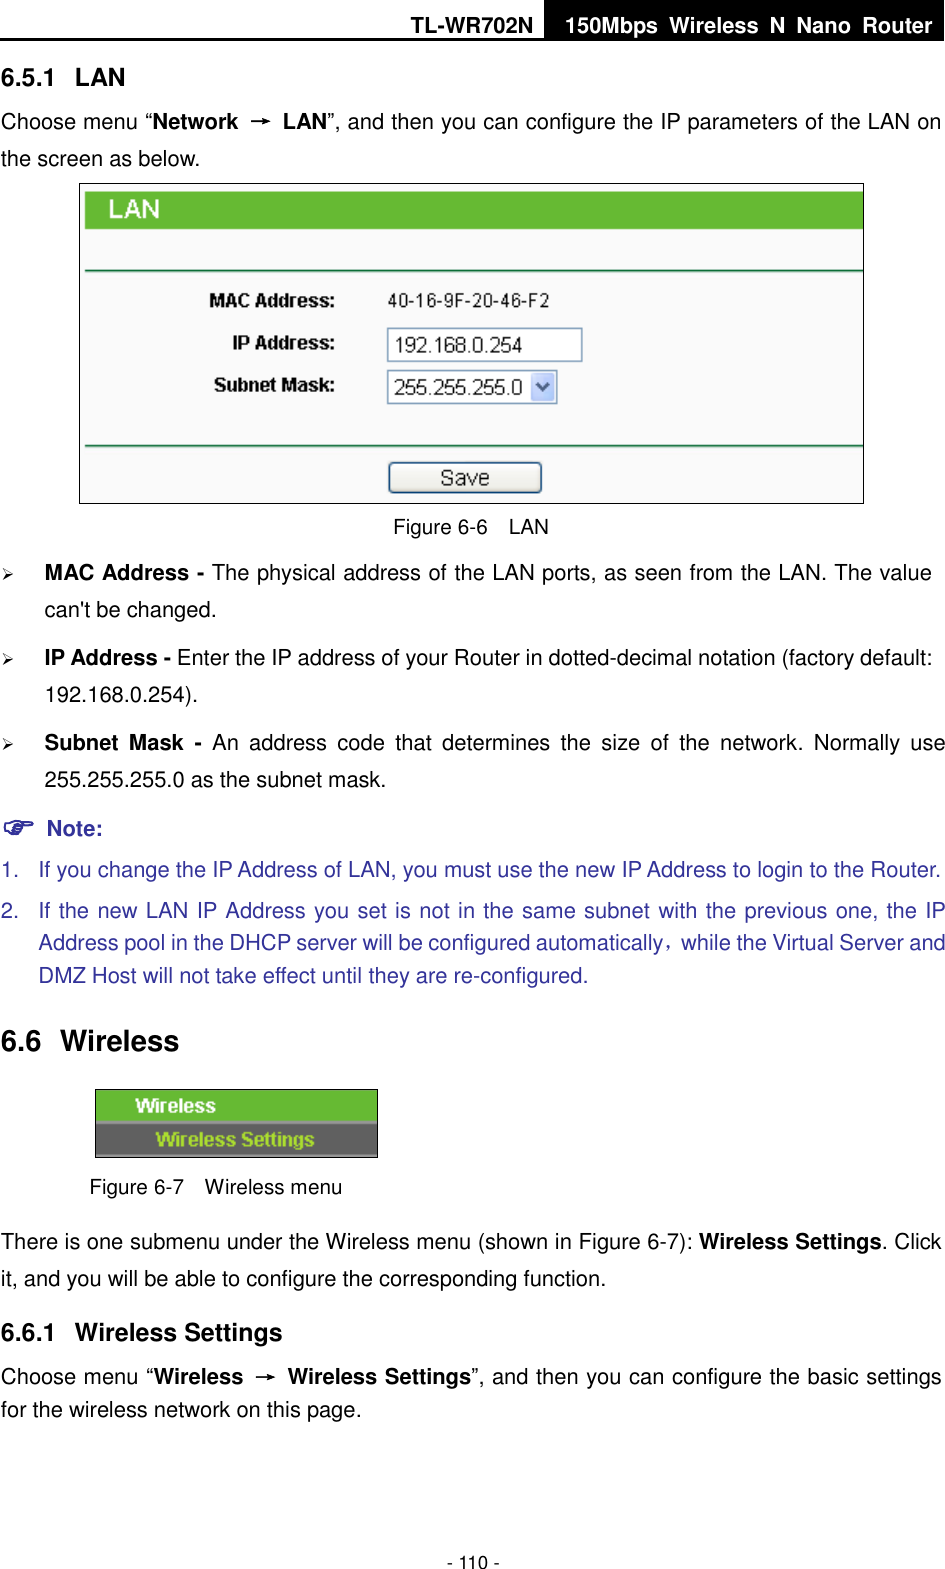 TL-WR702N 150Mbps  Wireless  N  Nano  Router  - 110 - 6.5.1  LAN Choose menu “Network  →  LAN”, and then you can configure the IP parameters of the LAN on the screen as below.  Figure 6-6  LAN  MAC Address - The physical address of the LAN ports, as seen from the LAN. The value can&apos;t be changed.  IP Address - Enter the IP address of your Router in dotted-decimal notation (factory default: 192.168.0.254).  Subnet  Mask  -  An  address  code  that  determines  the  size  of  the  network.  Normally  use 255.255.255.0 as the subnet mask.    Note: 1.  If you change the IP Address of LAN, you must use the new IP Address to login to the Router.   2.  If the new LAN IP Address you set is not in the same subnet with the previous one, the IP Address pool in the DHCP server will be configured automatically，while the Virtual Server and DMZ Host will not take effect until they are re-configured. 6.6  Wireless  Figure 6-7  Wireless menu There is one submenu under the Wireless menu (shown in Figure 6-7): Wireless Settings. Click it, and you will be able to configure the corresponding function.   6.6.1  Wireless Settings Choose menu “Wireless  →  Wireless Settings”, and then you can configure the basic settings for the wireless network on this page. 